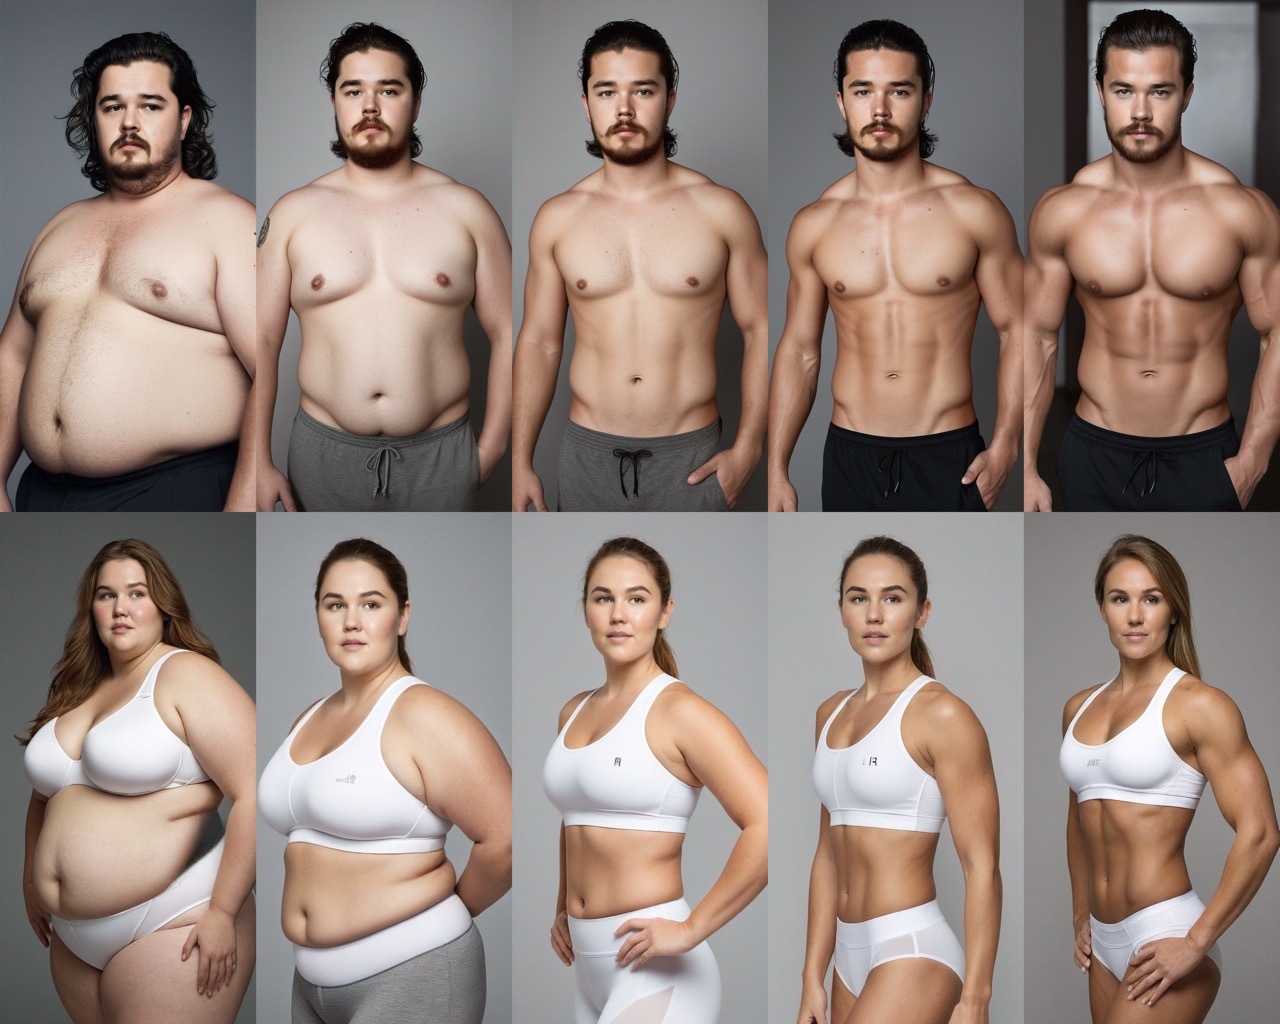 FAT2FIT: Generate your body transformation using AI